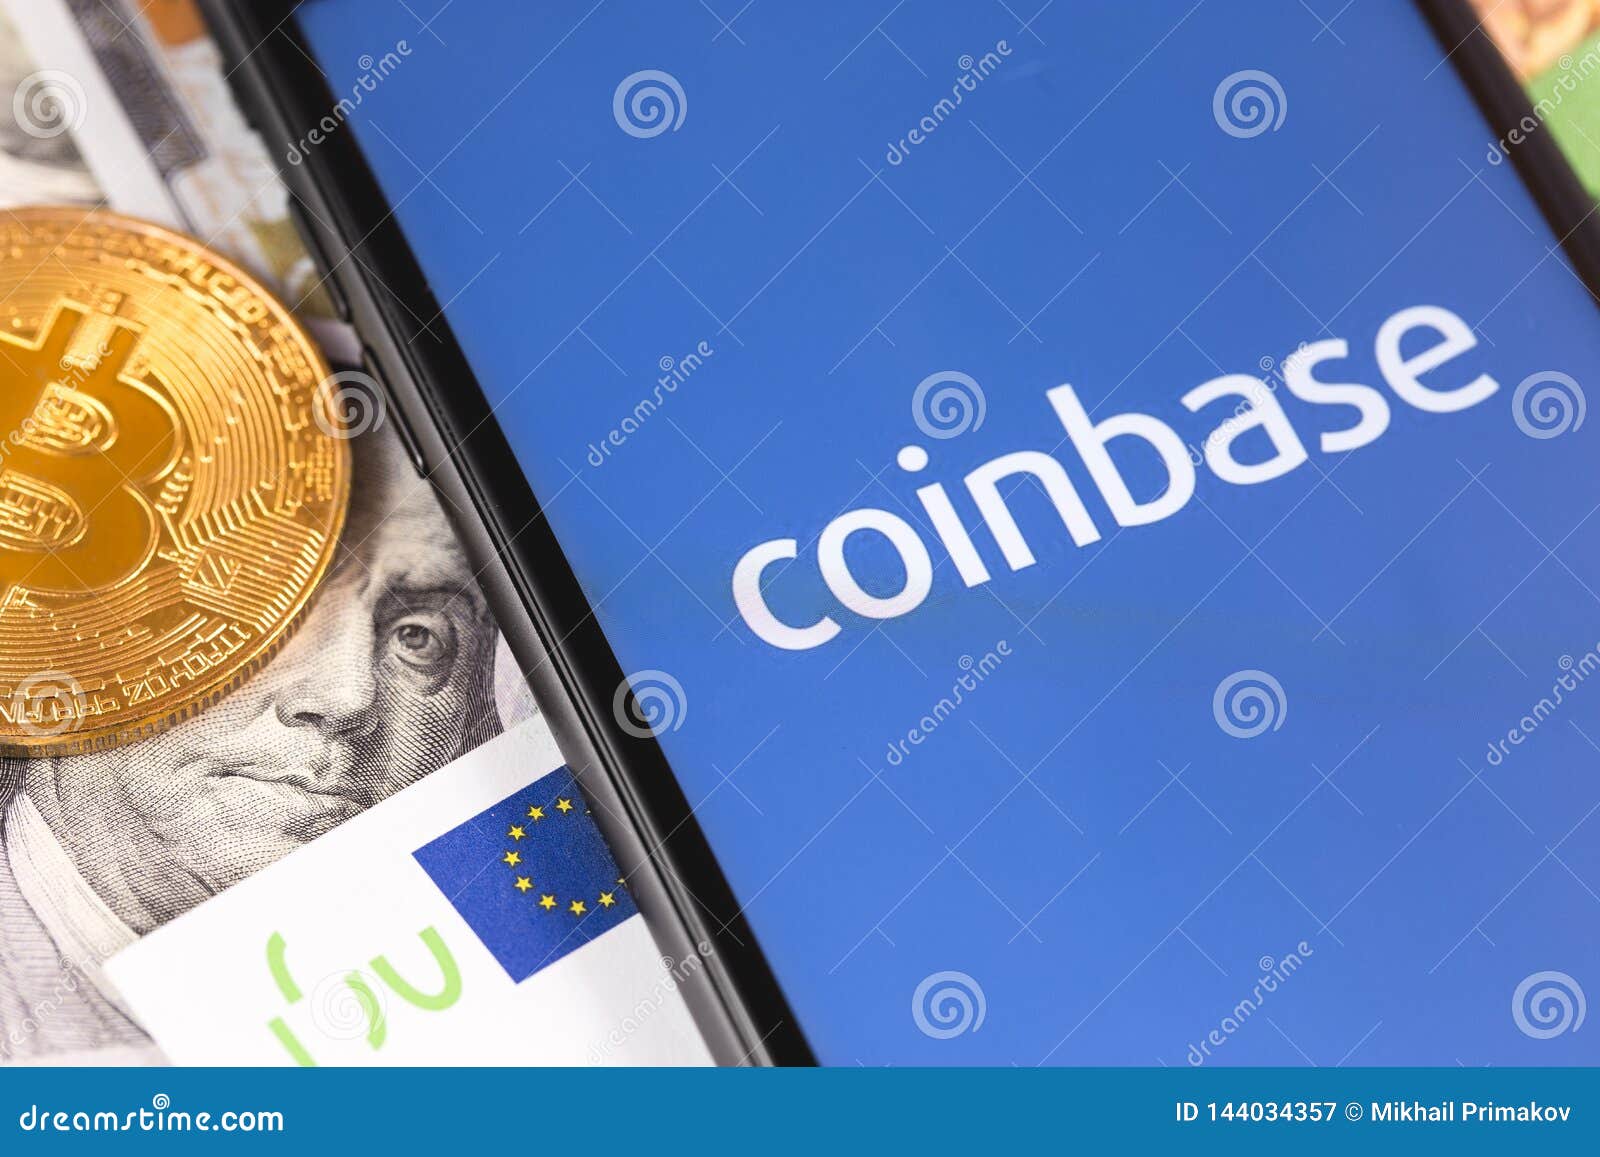 Bitcoin, Dollars, Euro Banknotes And Smartphone With ...